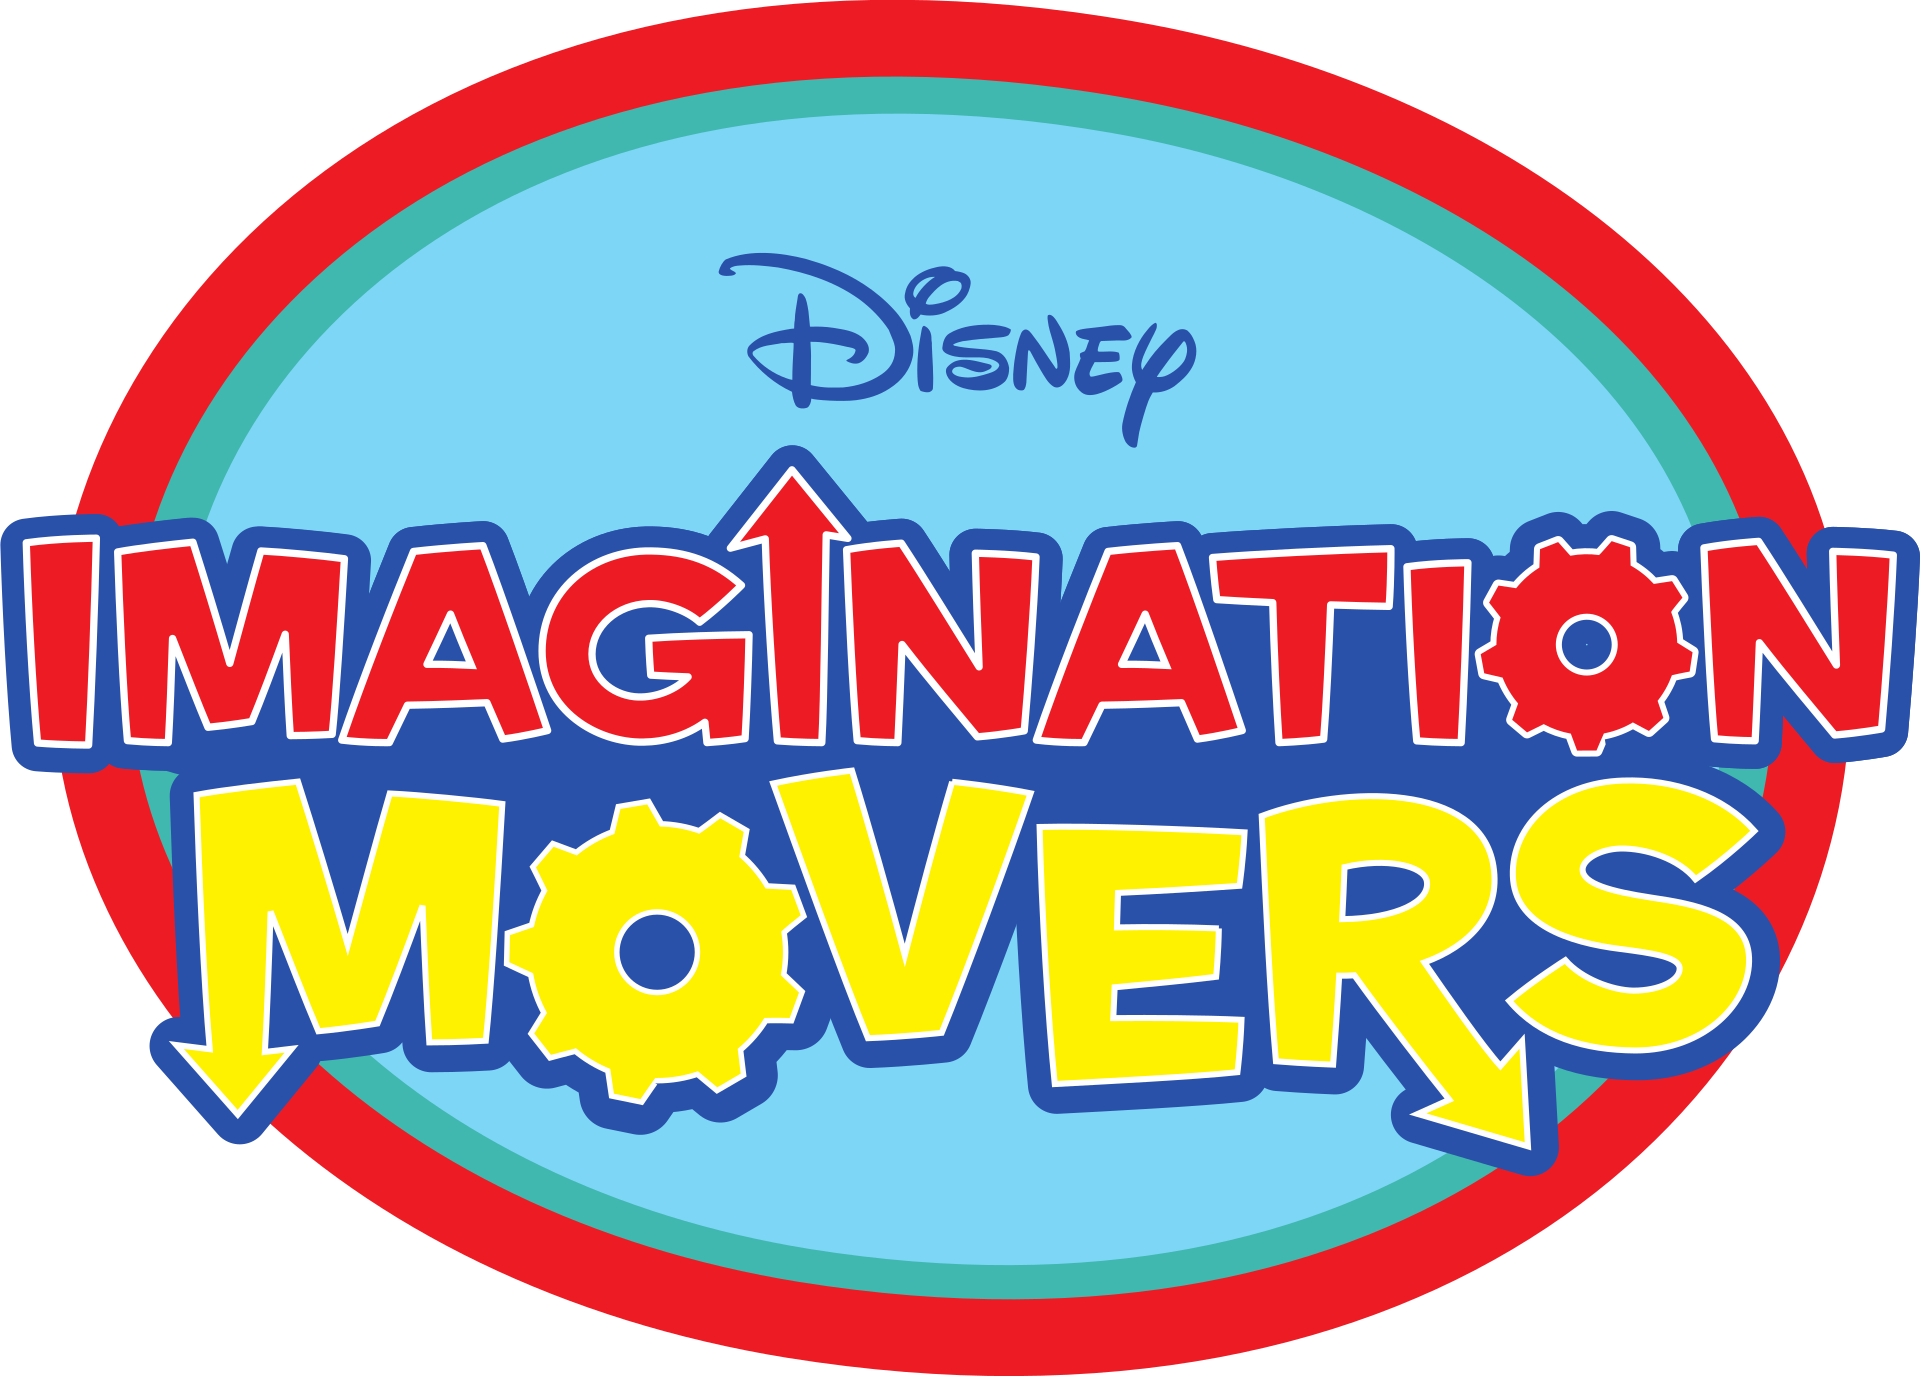 Imagination movers tv logo.png